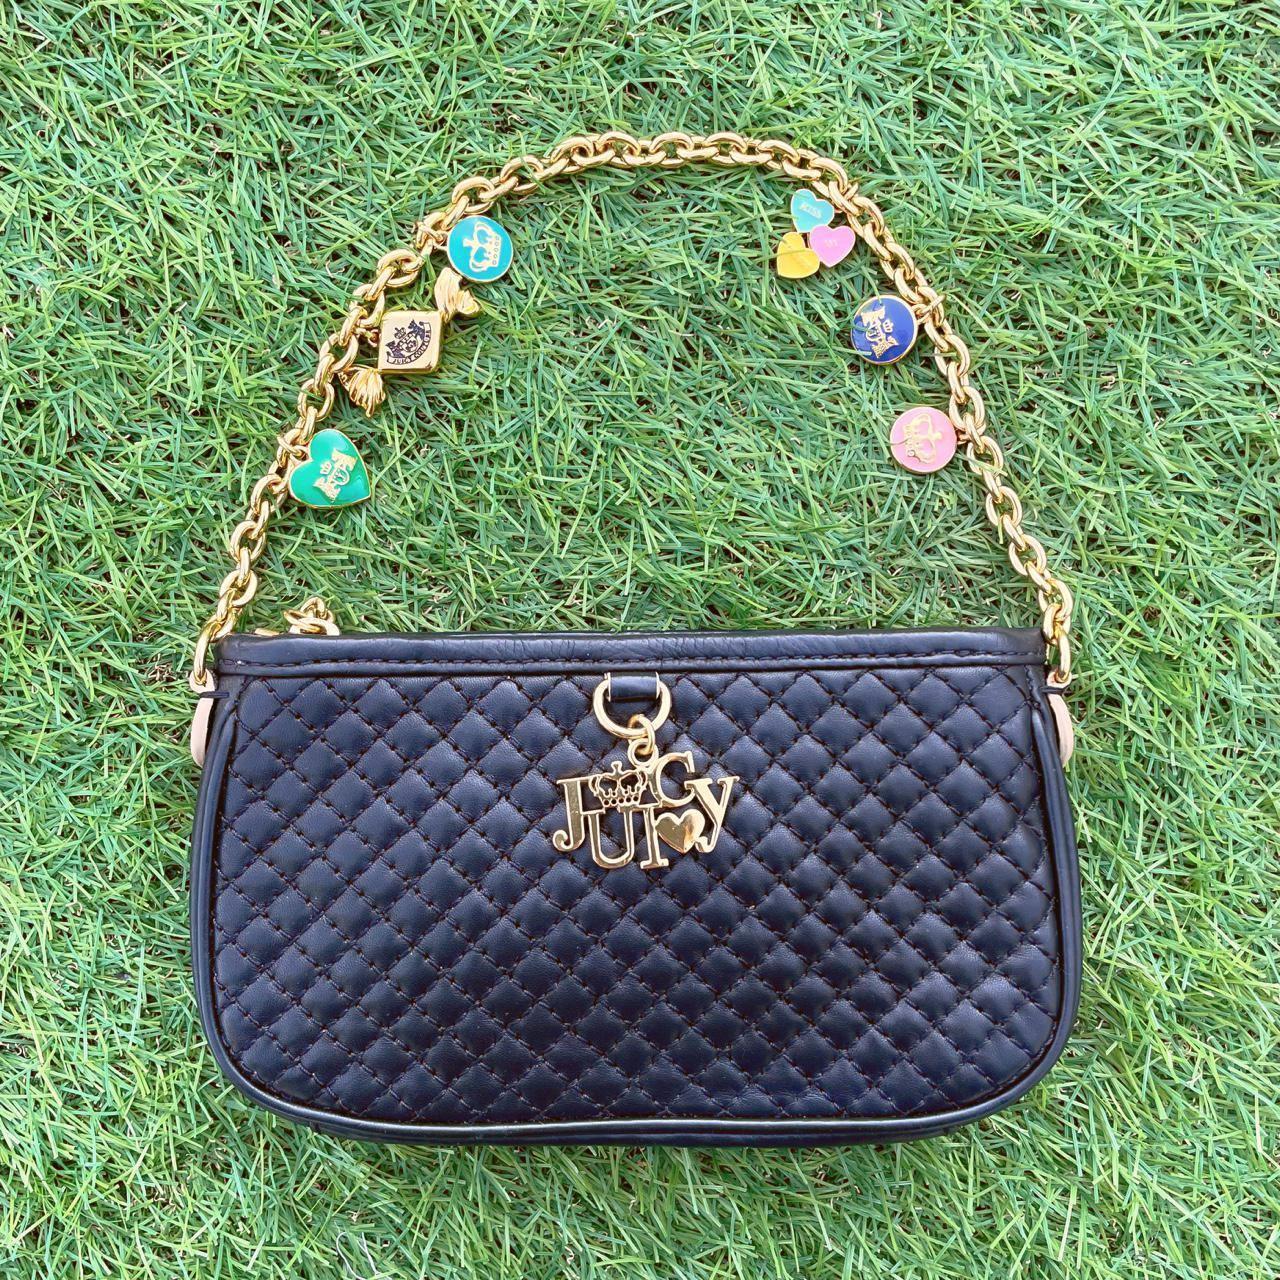 Juicy Couture Women's Black and Gold Bag